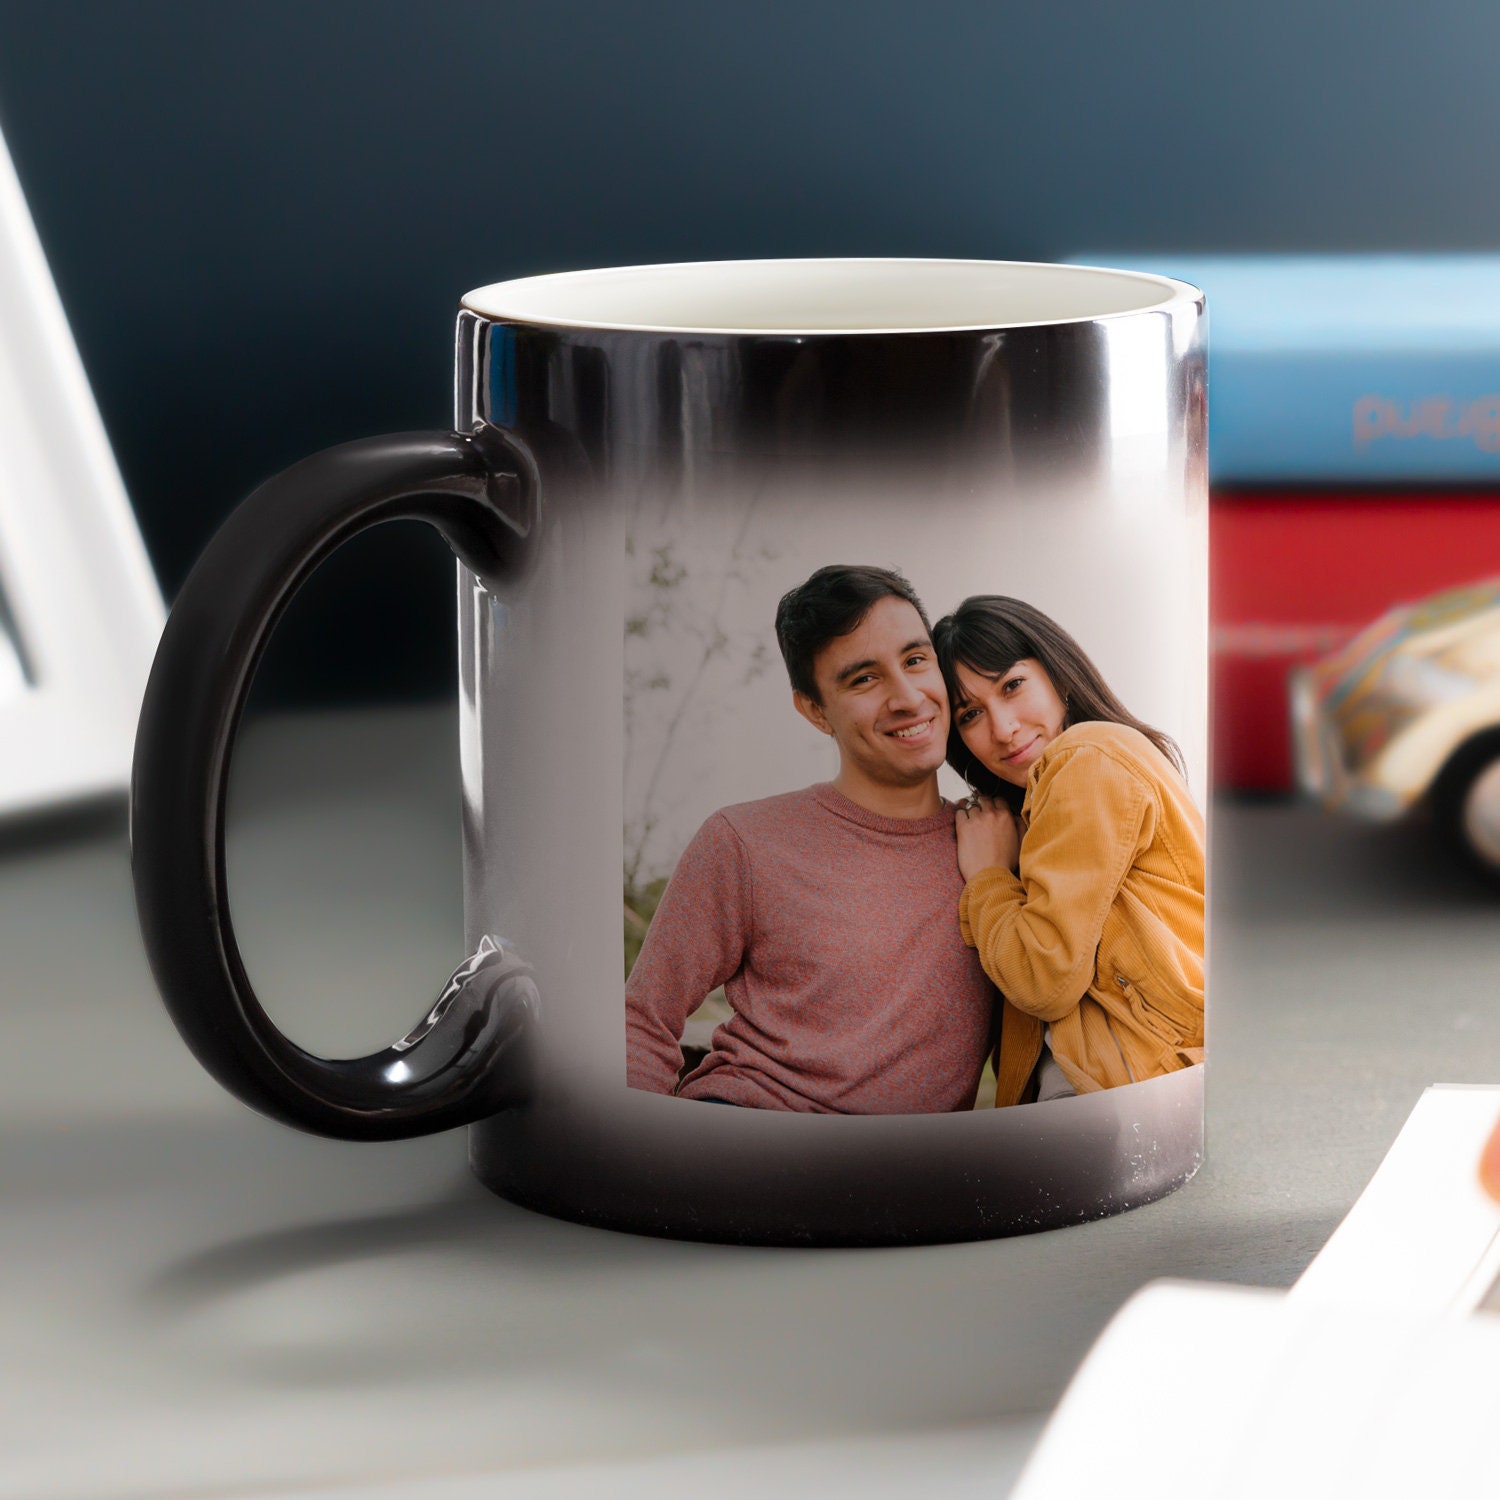 350ML Magic Mug DIY Hot Water Changing Color Ceramic Cup LOGO Photo  Customize Picture Birthday Creative Gift Present